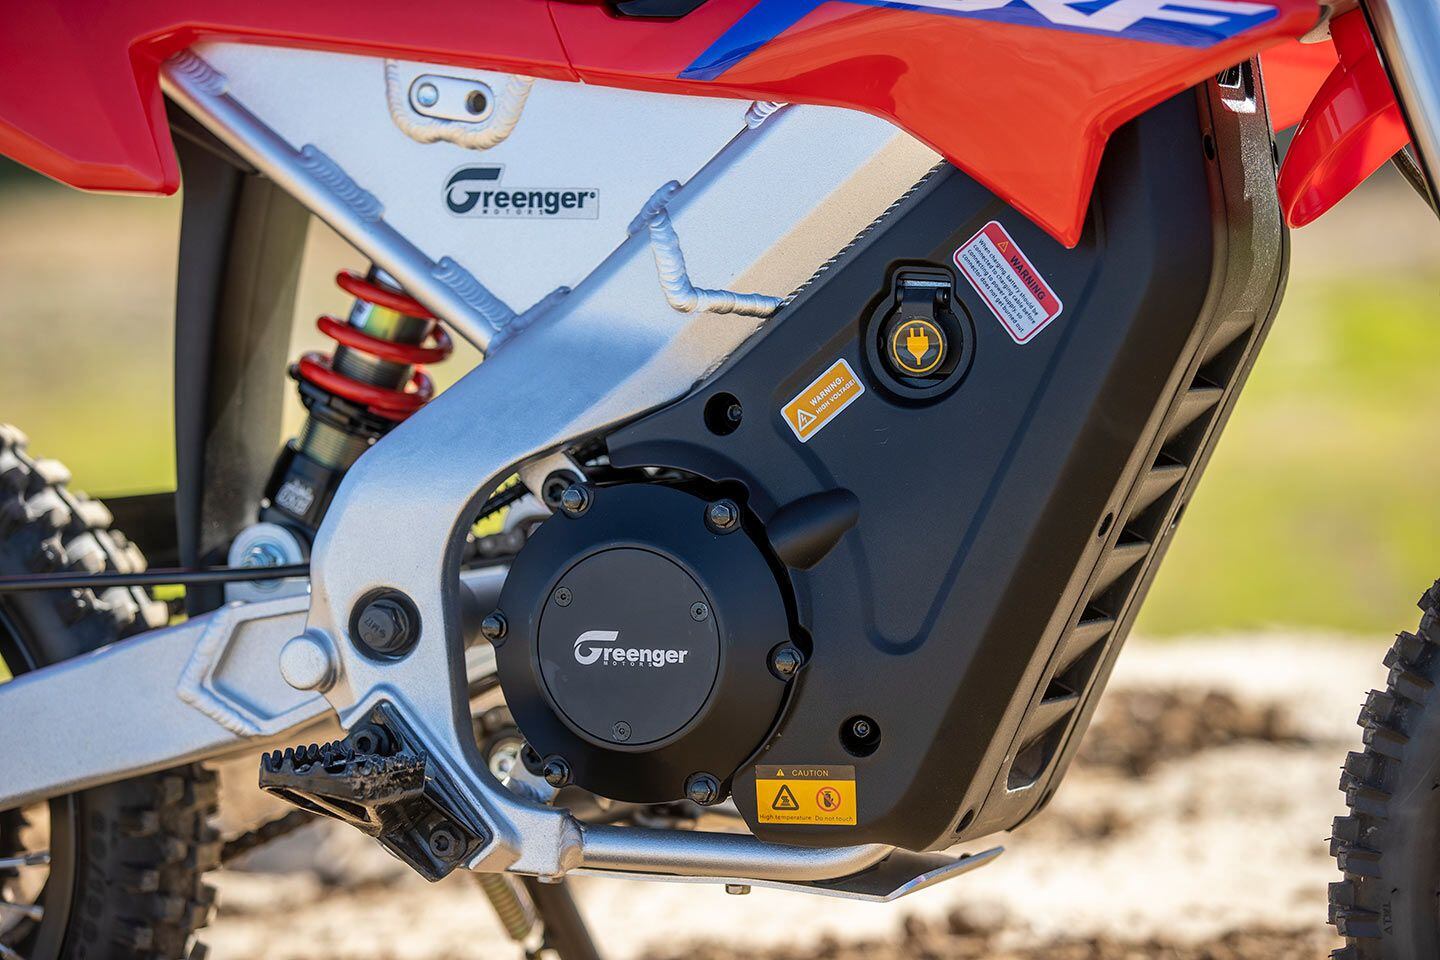 The CRF-E2 boasts pleasing CRF-family styling including its robust-looking aluminum frame and swingarm.